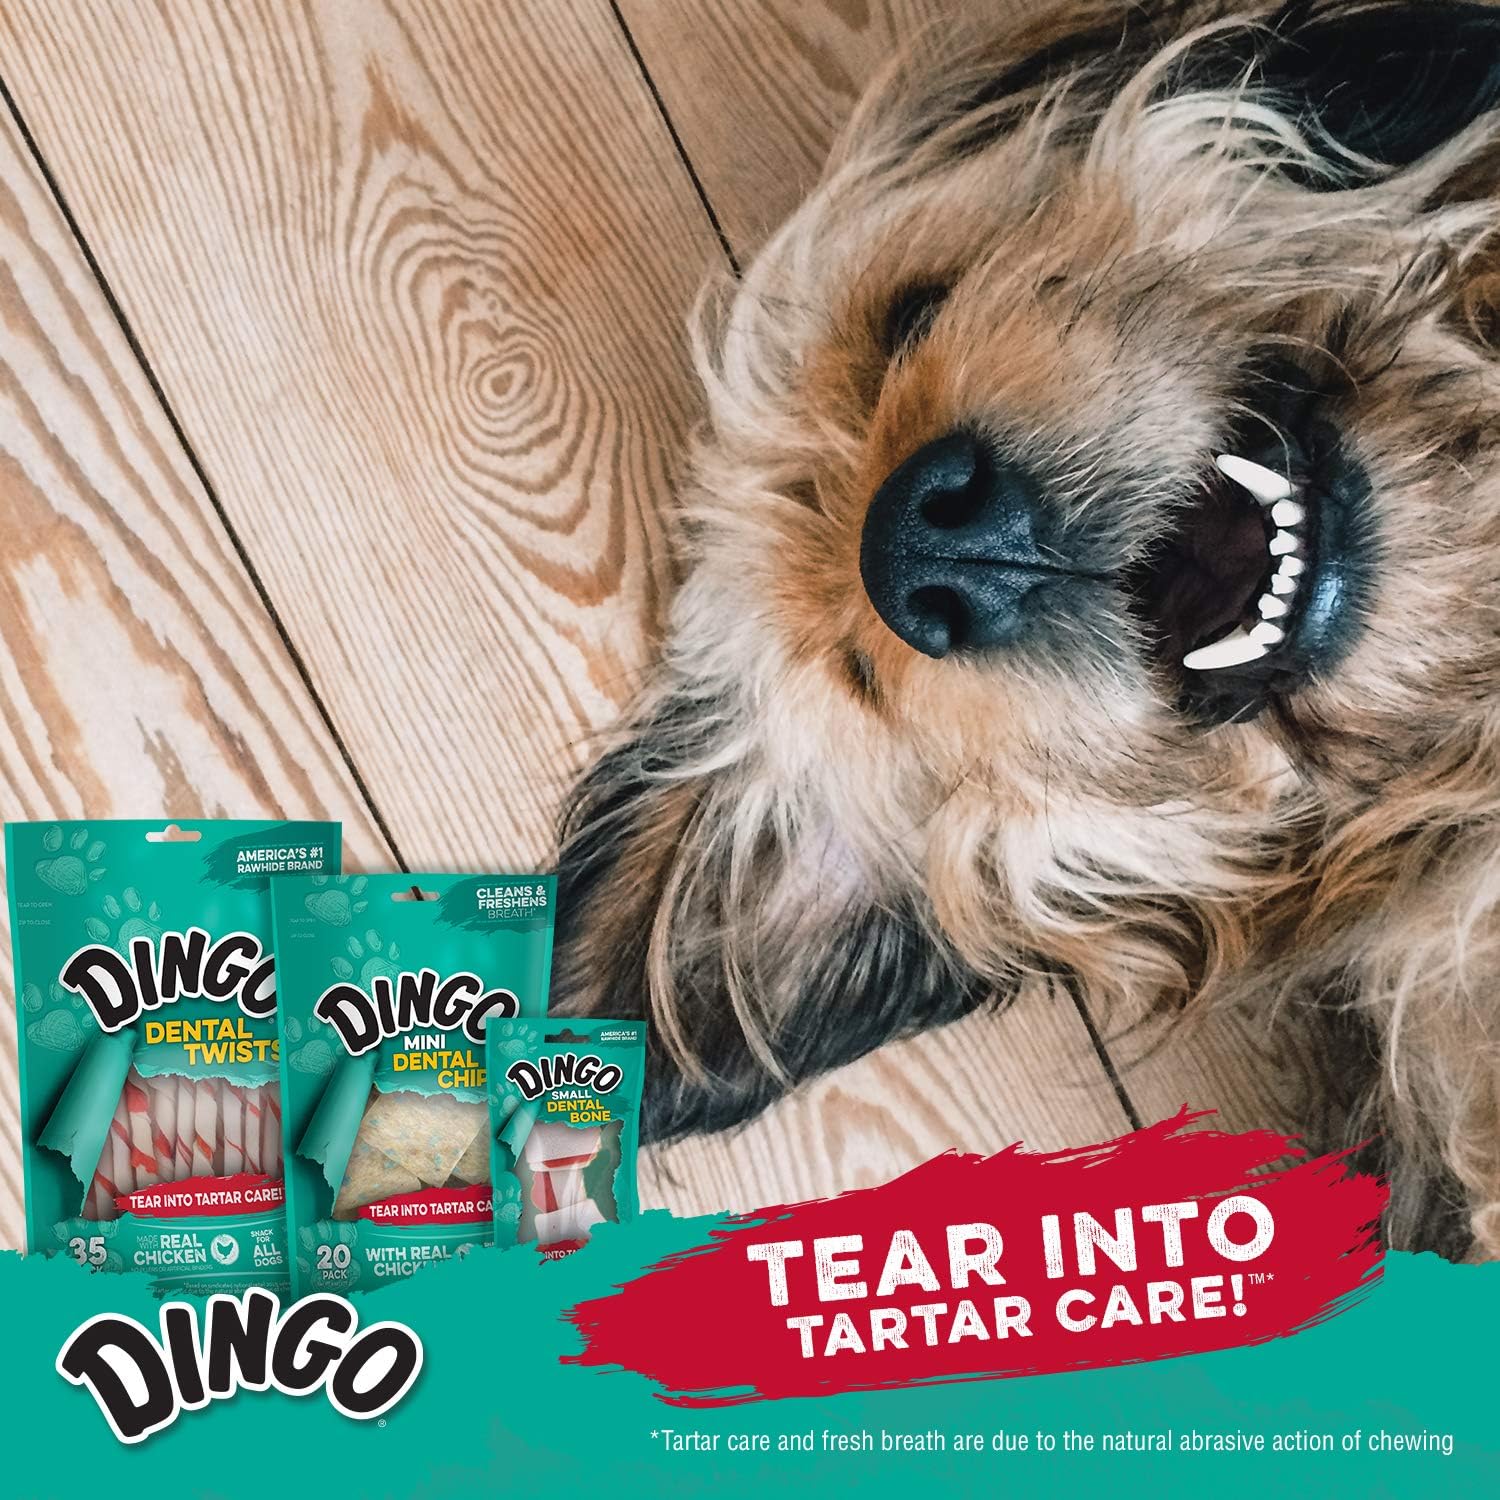 Dingo Tartar And Breath Dental Sticks For All Dogs, 48-Count : Pet Supplies